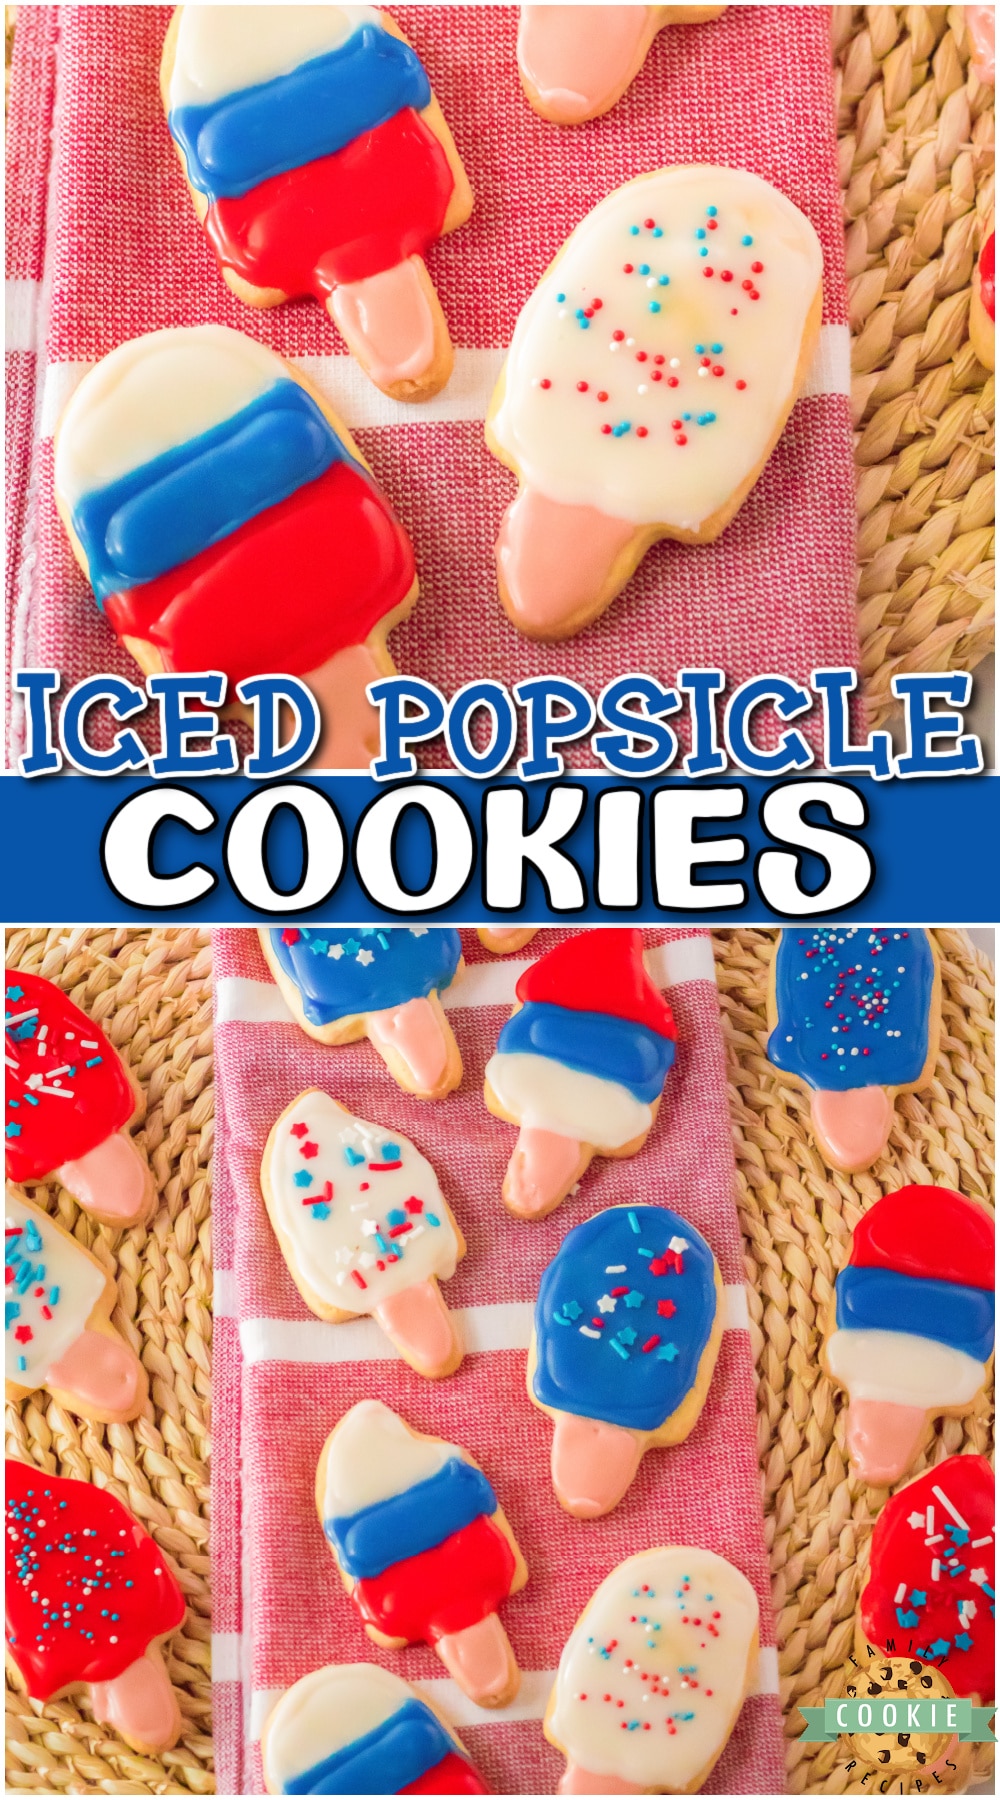 Popsicle Sugar Cookies are fun & tasty summer treat! Homemade sugar cookies cut into popsicle shapes & topped with royal icing everyone loves!